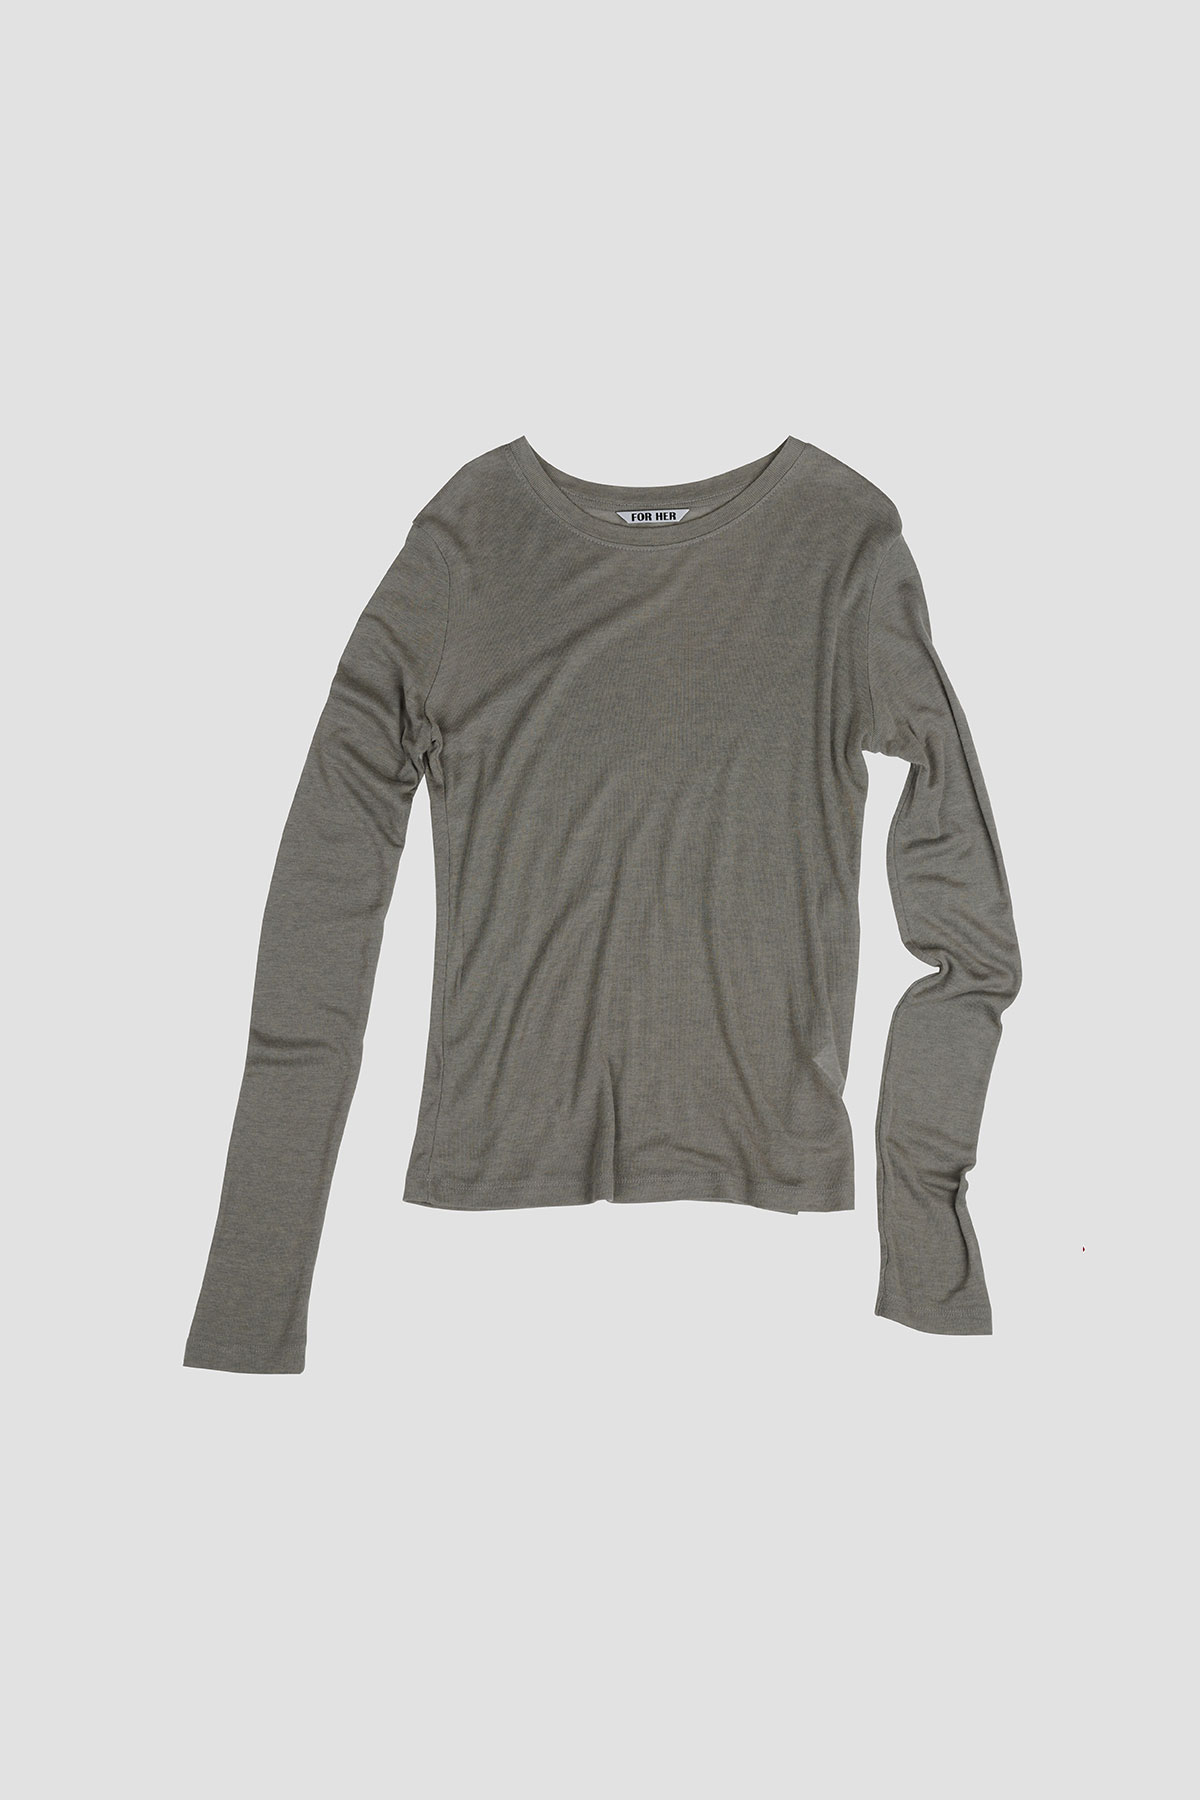 FOR HER SOFT LONG SLEEVE TOP (CHARCOAL) 13차 2/11 예약배송